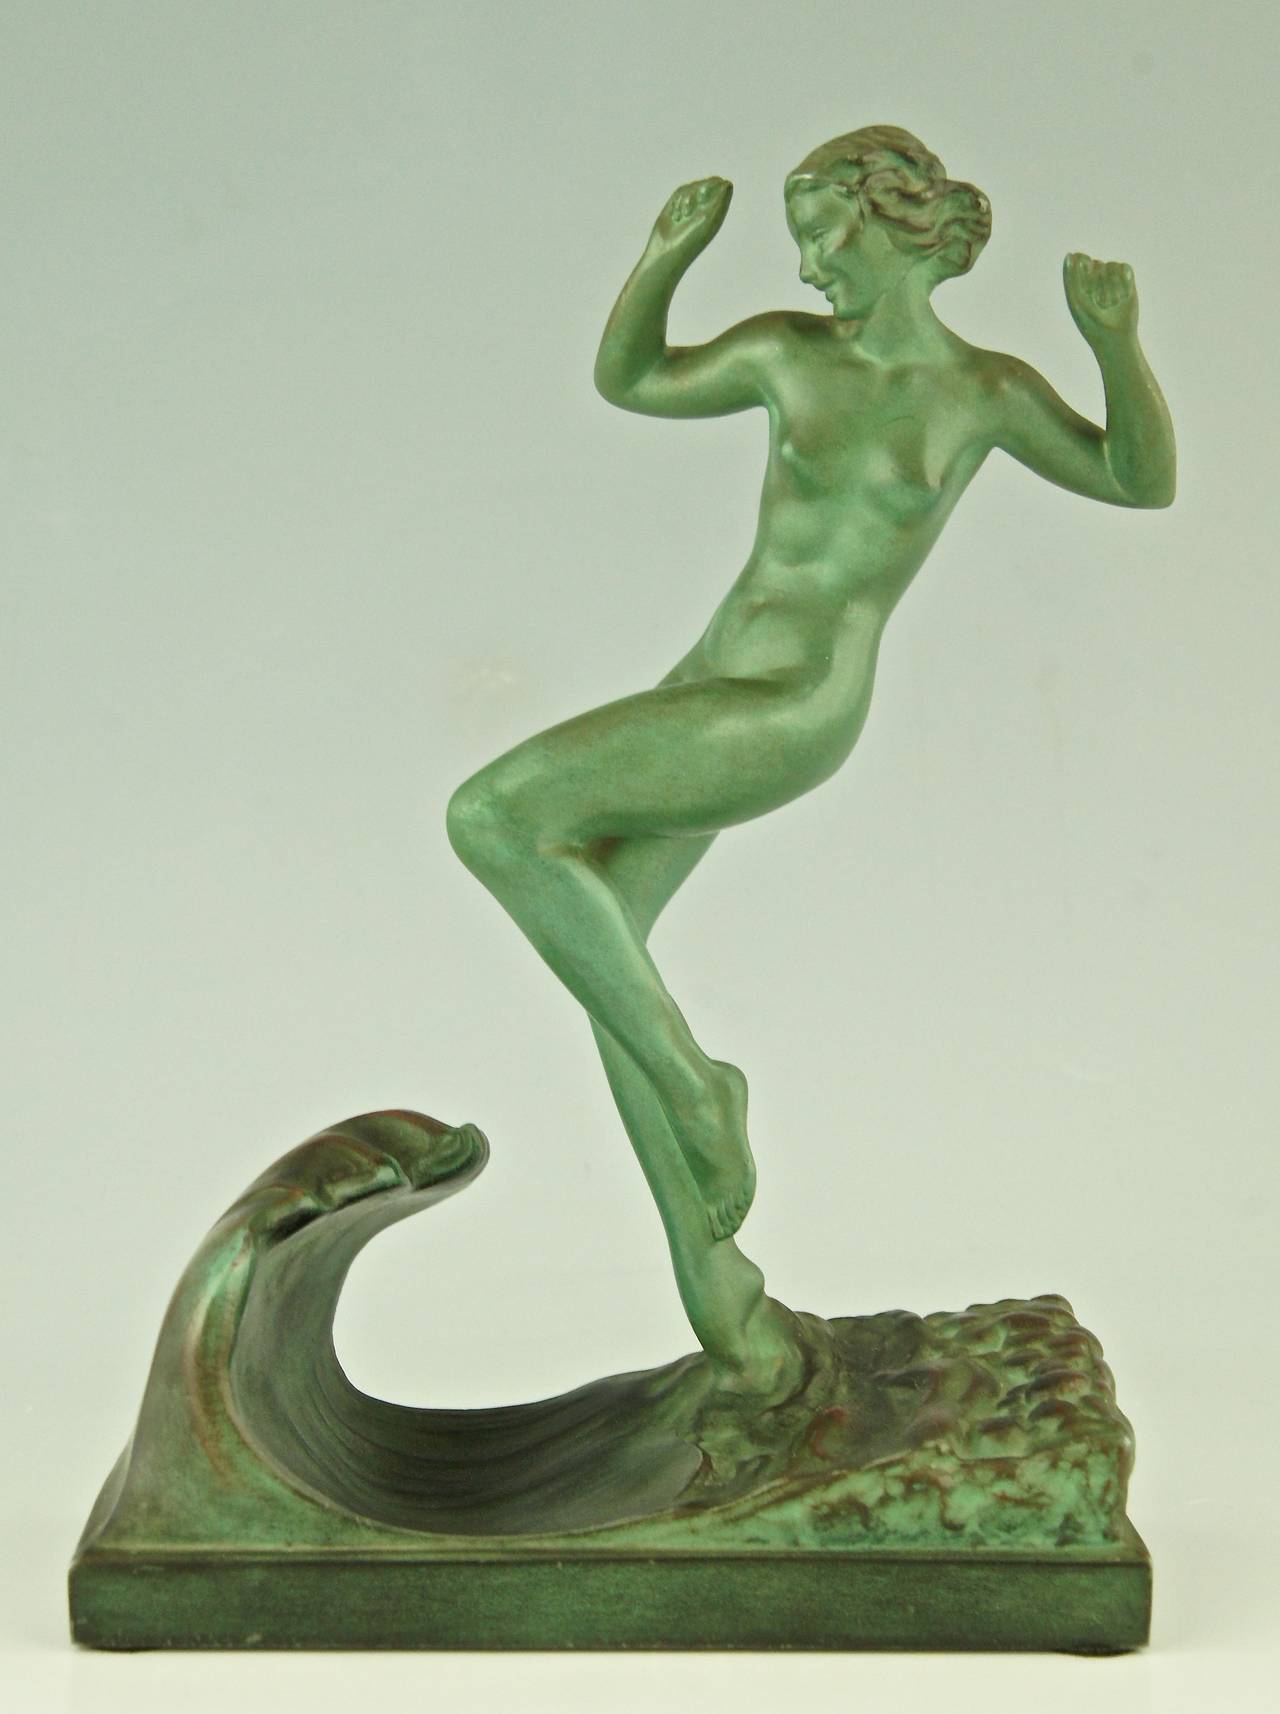 Art Deco sculpture of a nude in the waves. 
By Raymonde Guerbe, the wife of Pierre Le Faguays. 
Signature: R. Guerbe.
Style: Art Deco.
Condition: Good original condition, see pictures. 

Date: circa 1930.
Material: Metal with light and dark